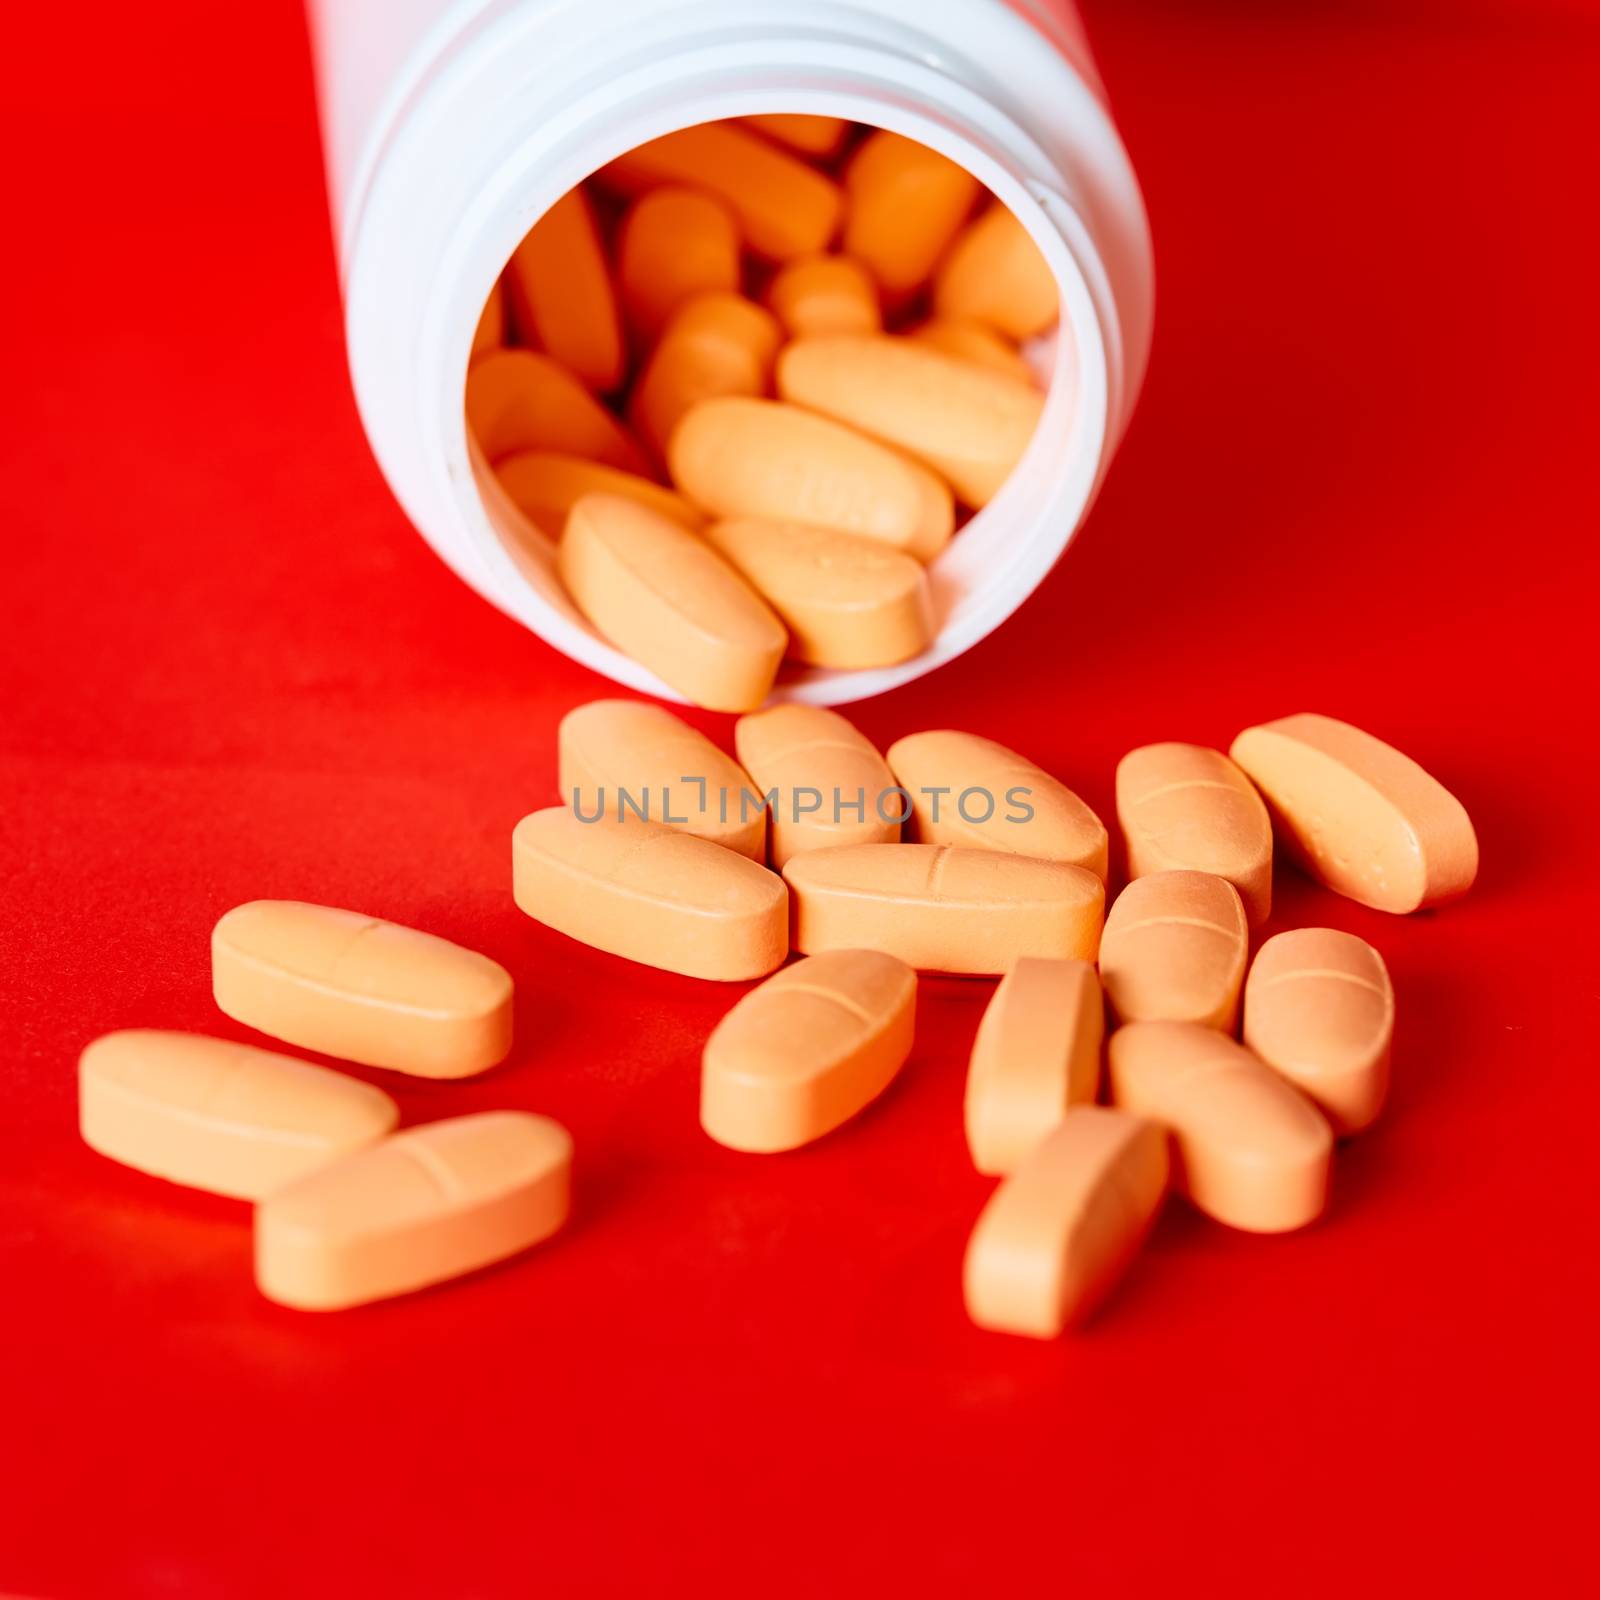 Pills spilling out of pill bottle on red. Top view with copy space. Medicine concept. Shallow dof